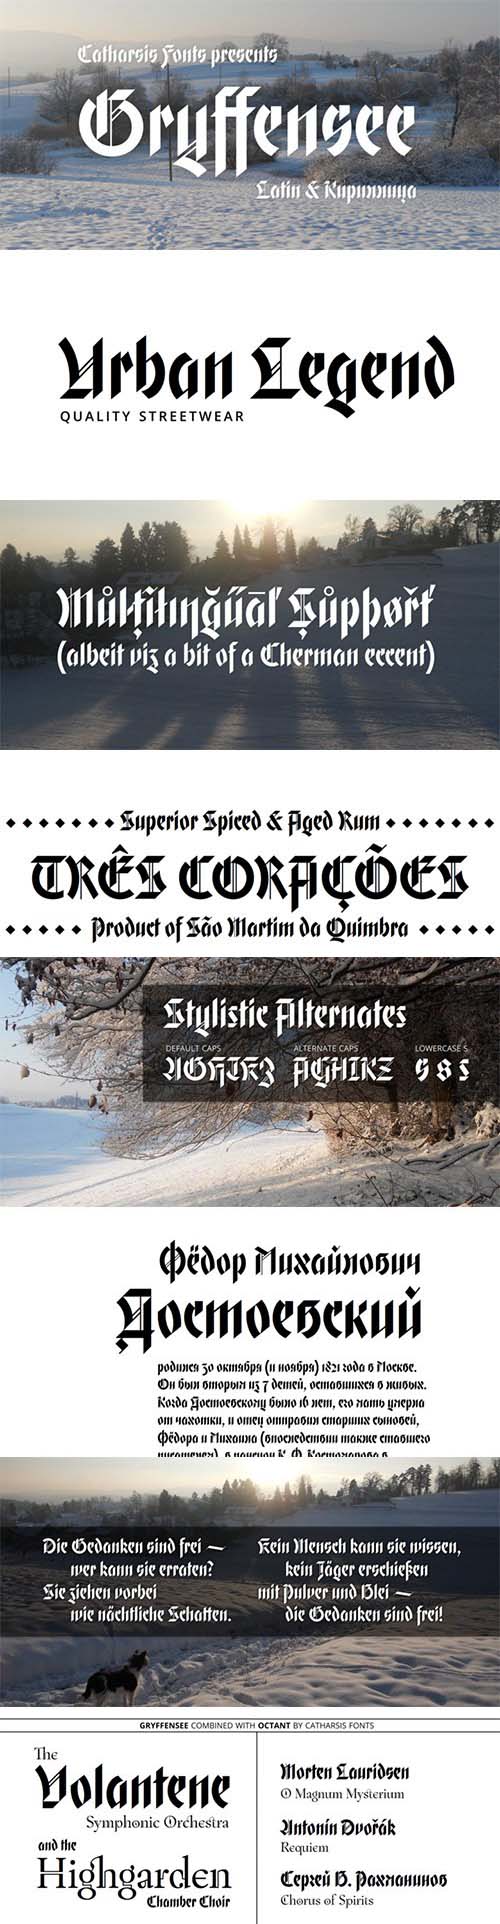 Gryffensee Font Family